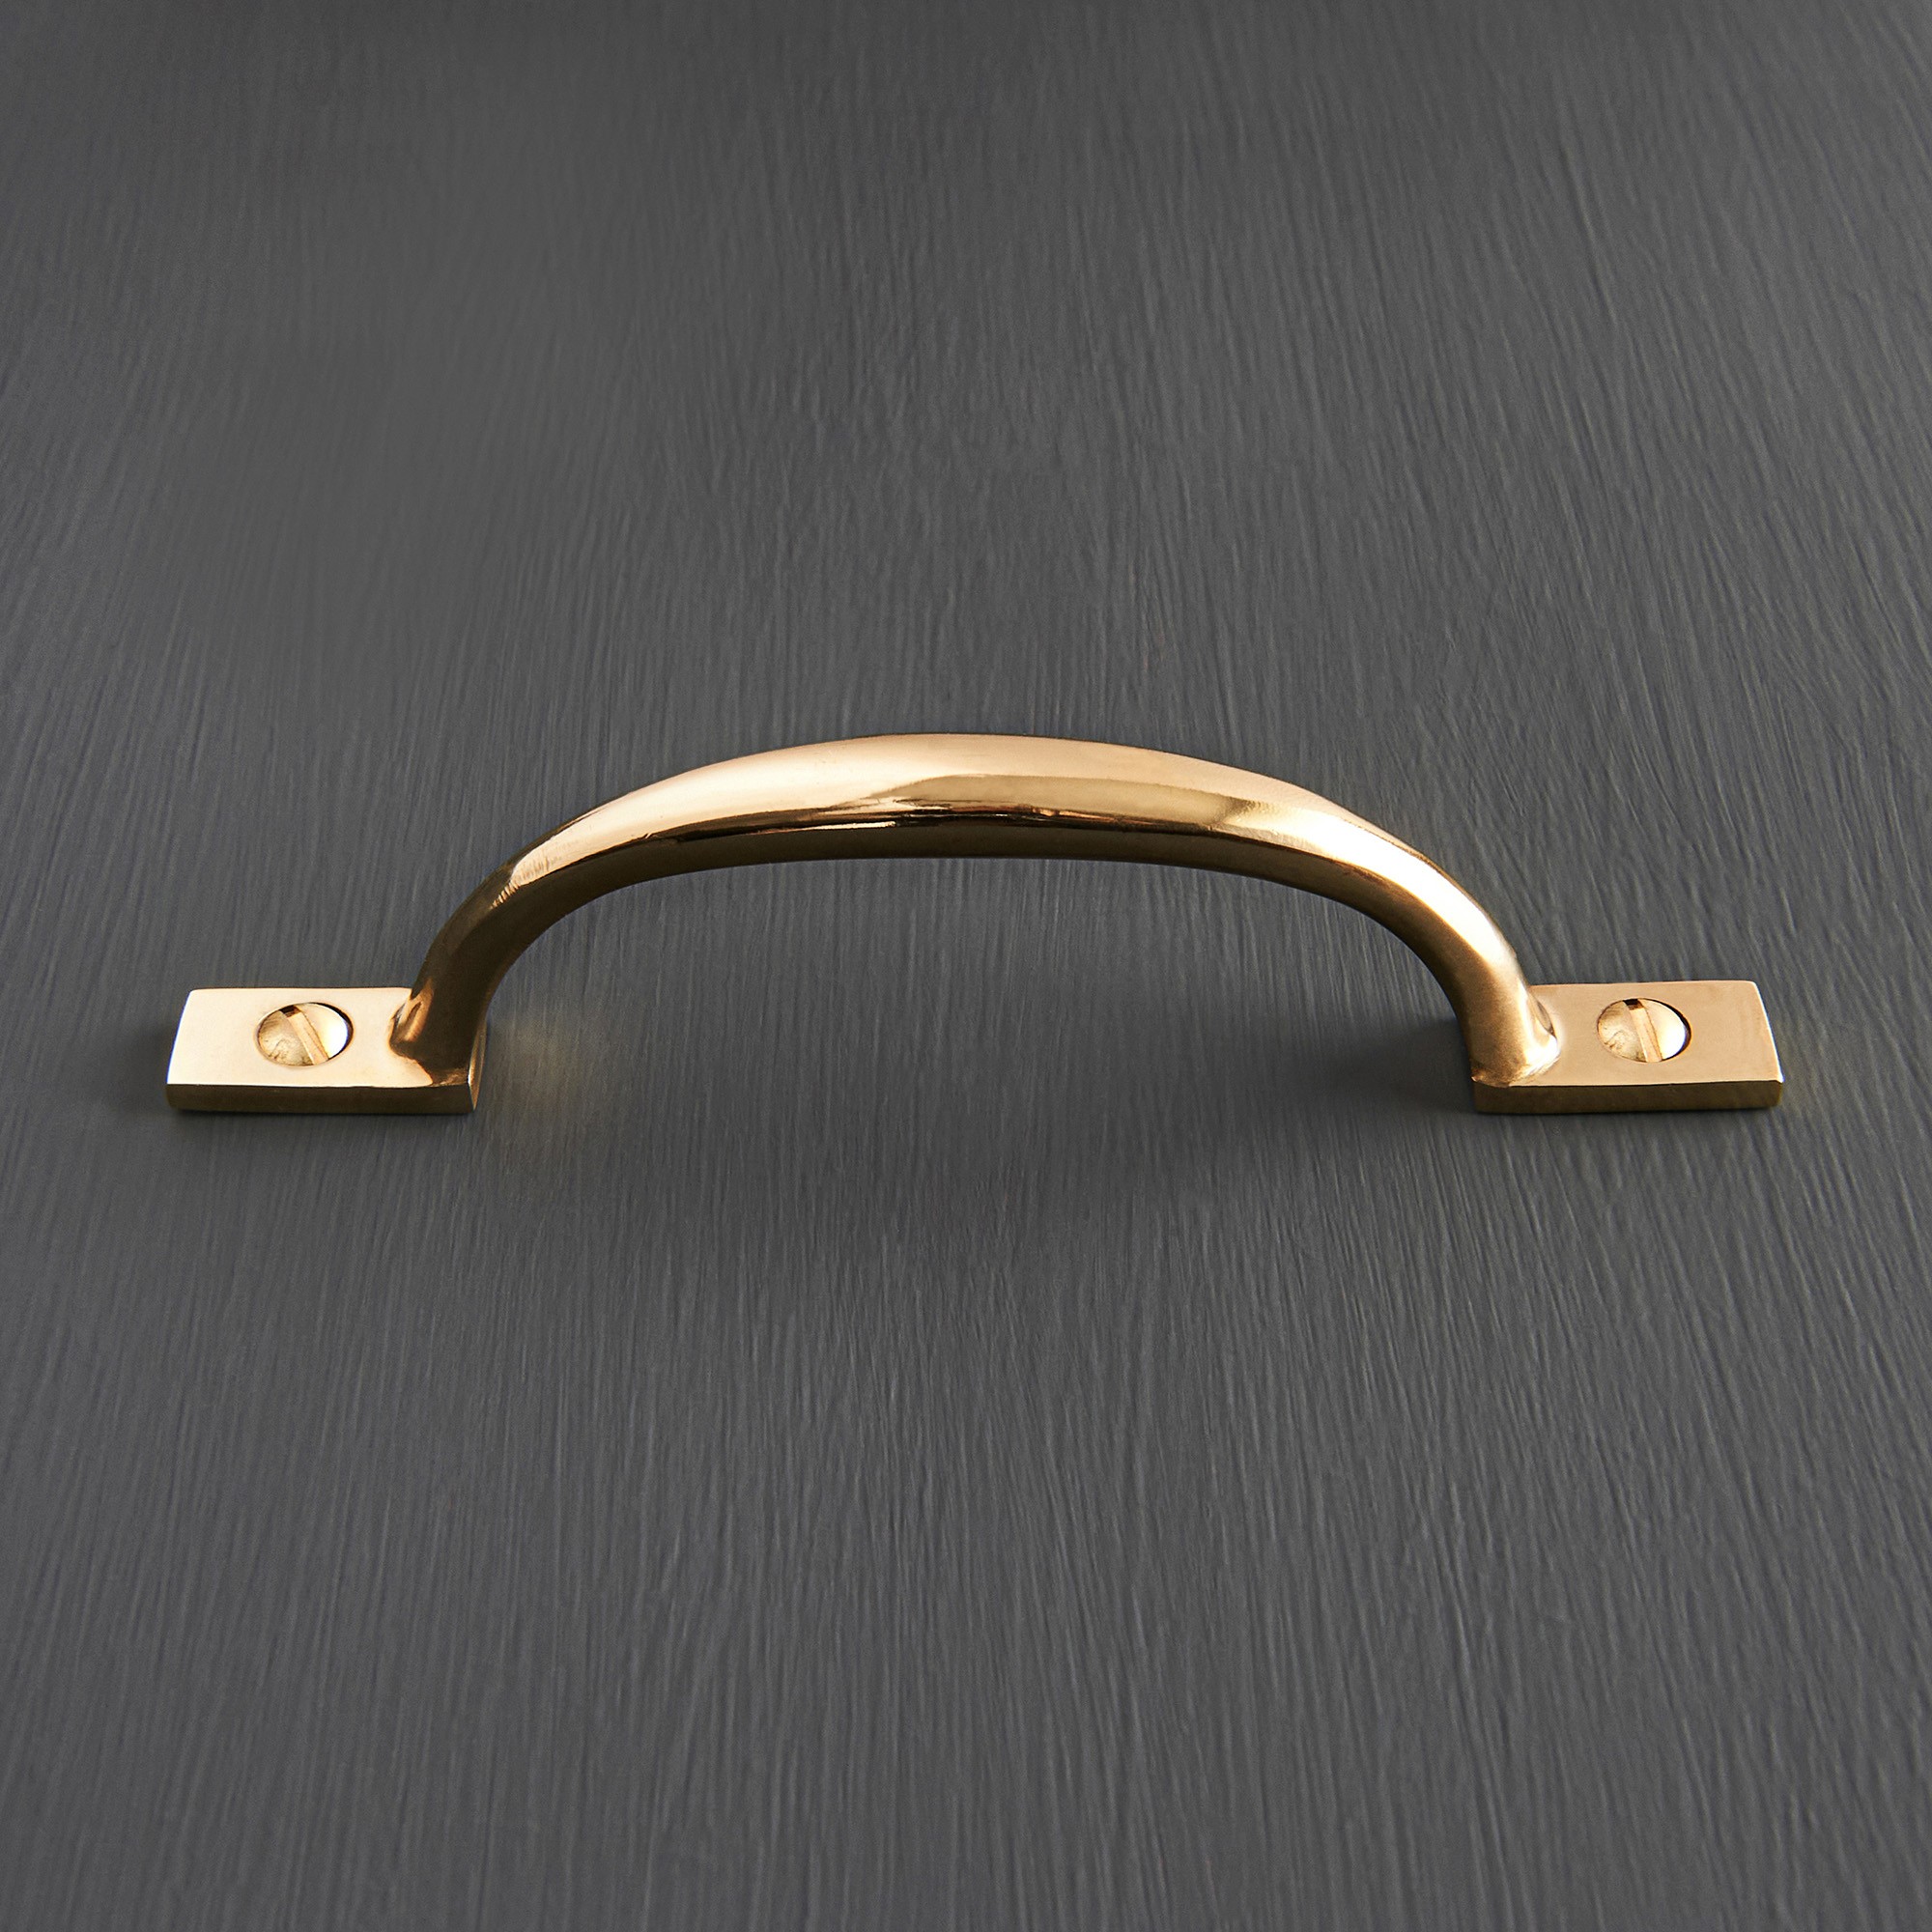 D Pull Drawer & Cupboard Handle - Brass - Grace and Glory